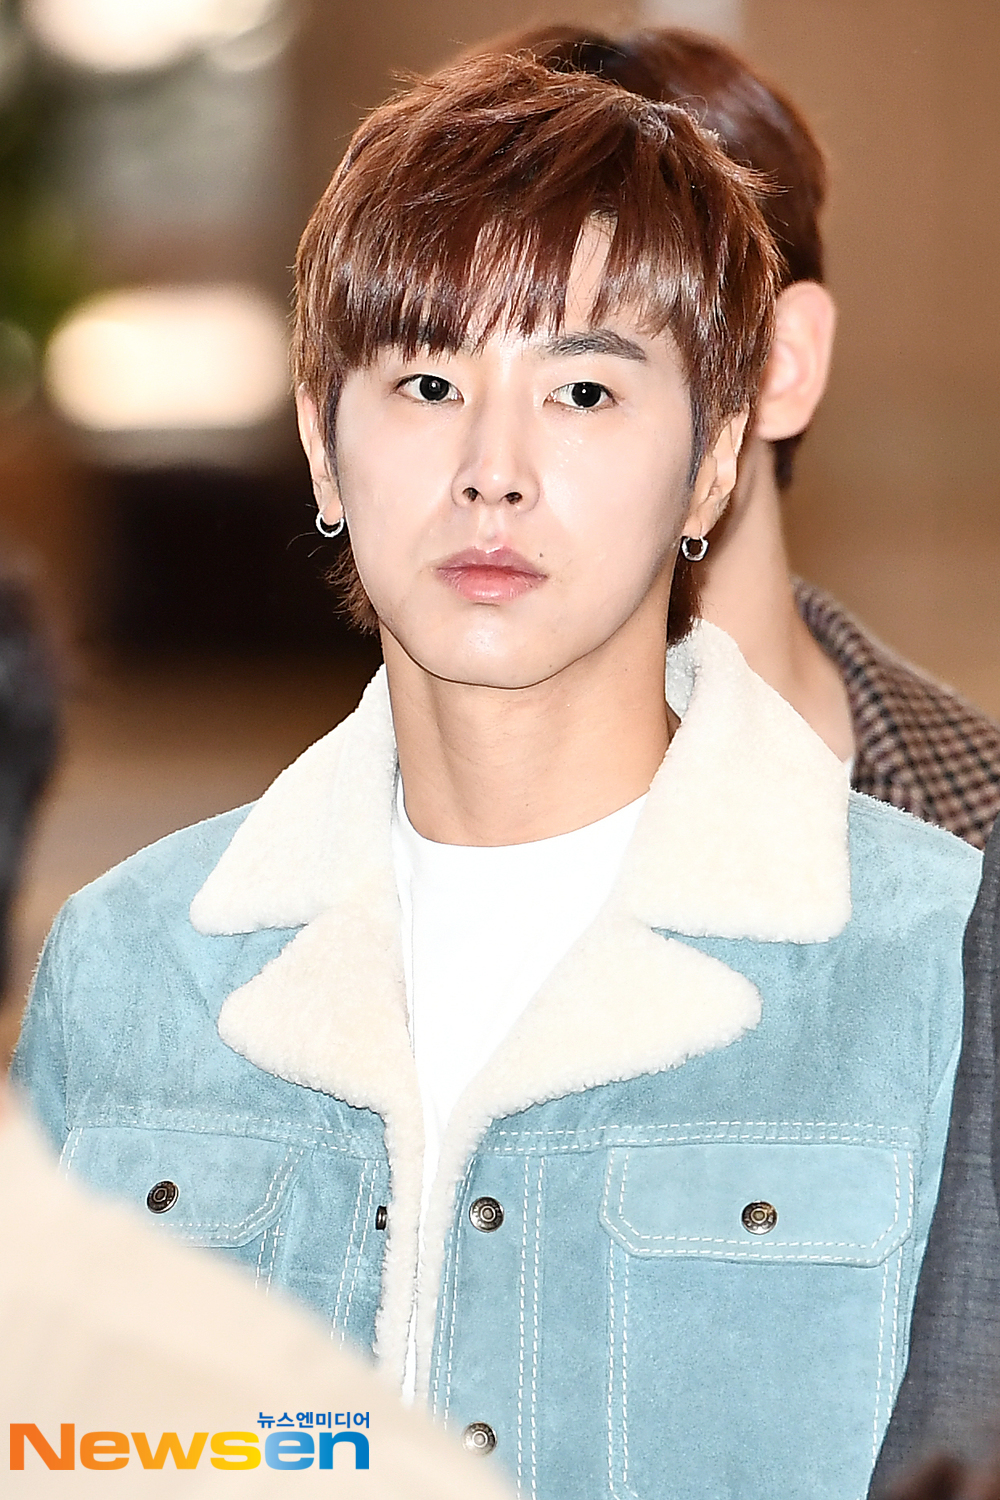 TVXQ members U-Know Yunho and Choi Chang-min departed for Tokyo Haneda on April 1 at Gimpo International Airport in Banghwa-dong, Gangseo-gu, Seoul to attend the Tohoshinki Fanclub Event 2019 TOHOSHINKI The GARDEN schedule.TVXQ member U-Know Yunho is leaving for Haneda, Tokyo.exponential earthquake